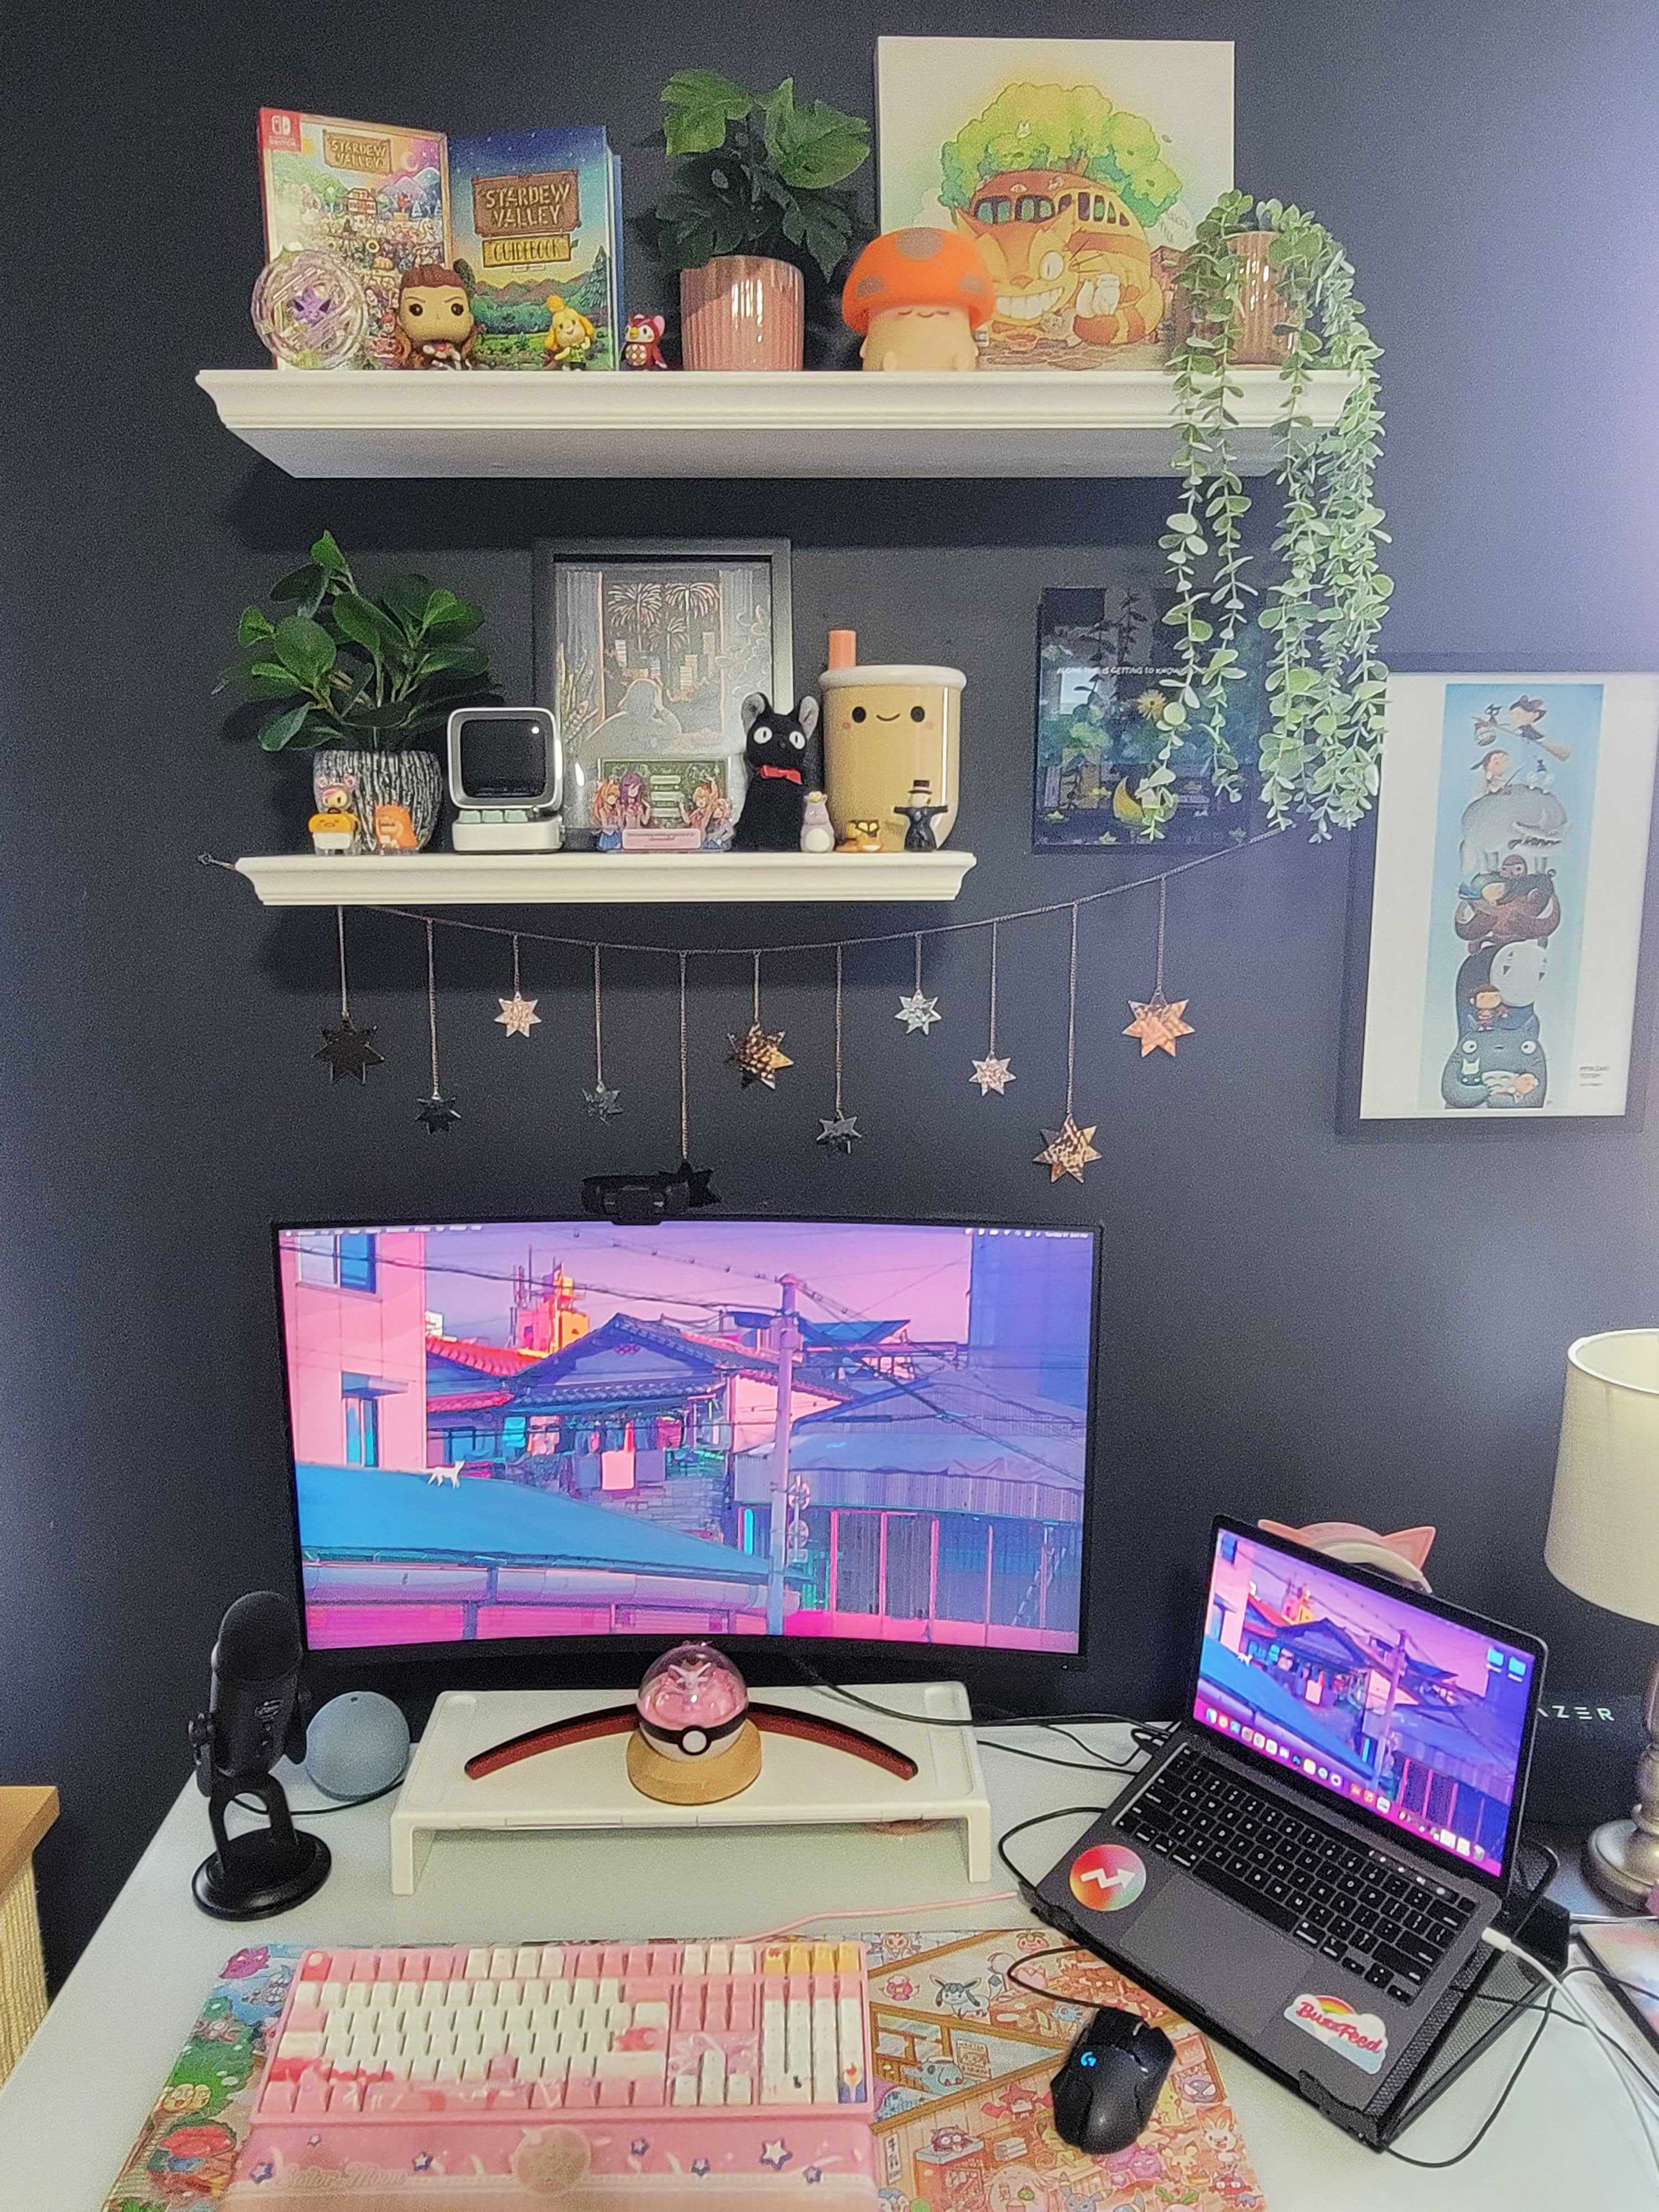 buzzfeed editor&#x27;s setup with two asymmetric shelves above desk filled with various decor